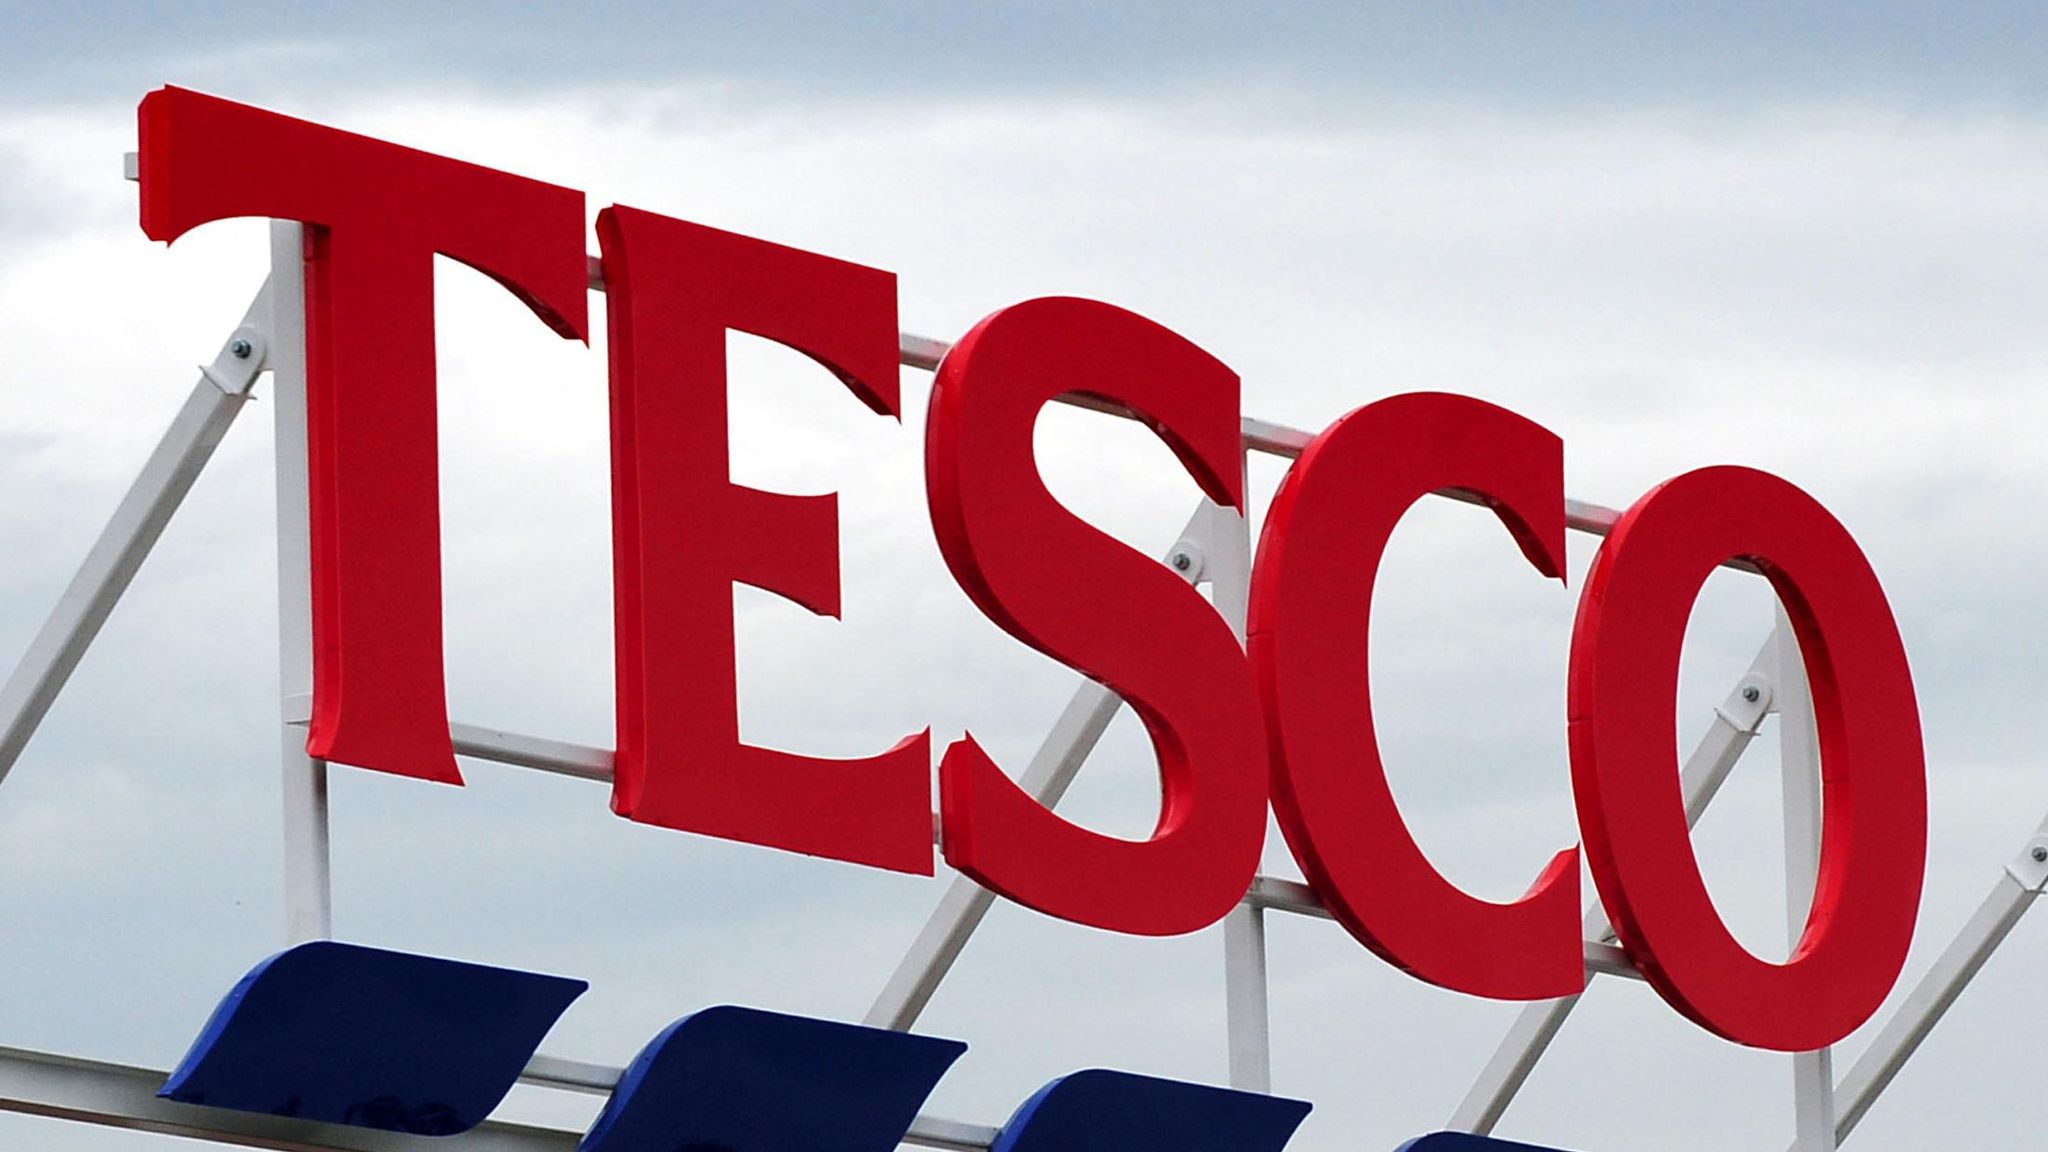 Tesco boss in parallel universe over price rises UK farmers chief says   Reuters